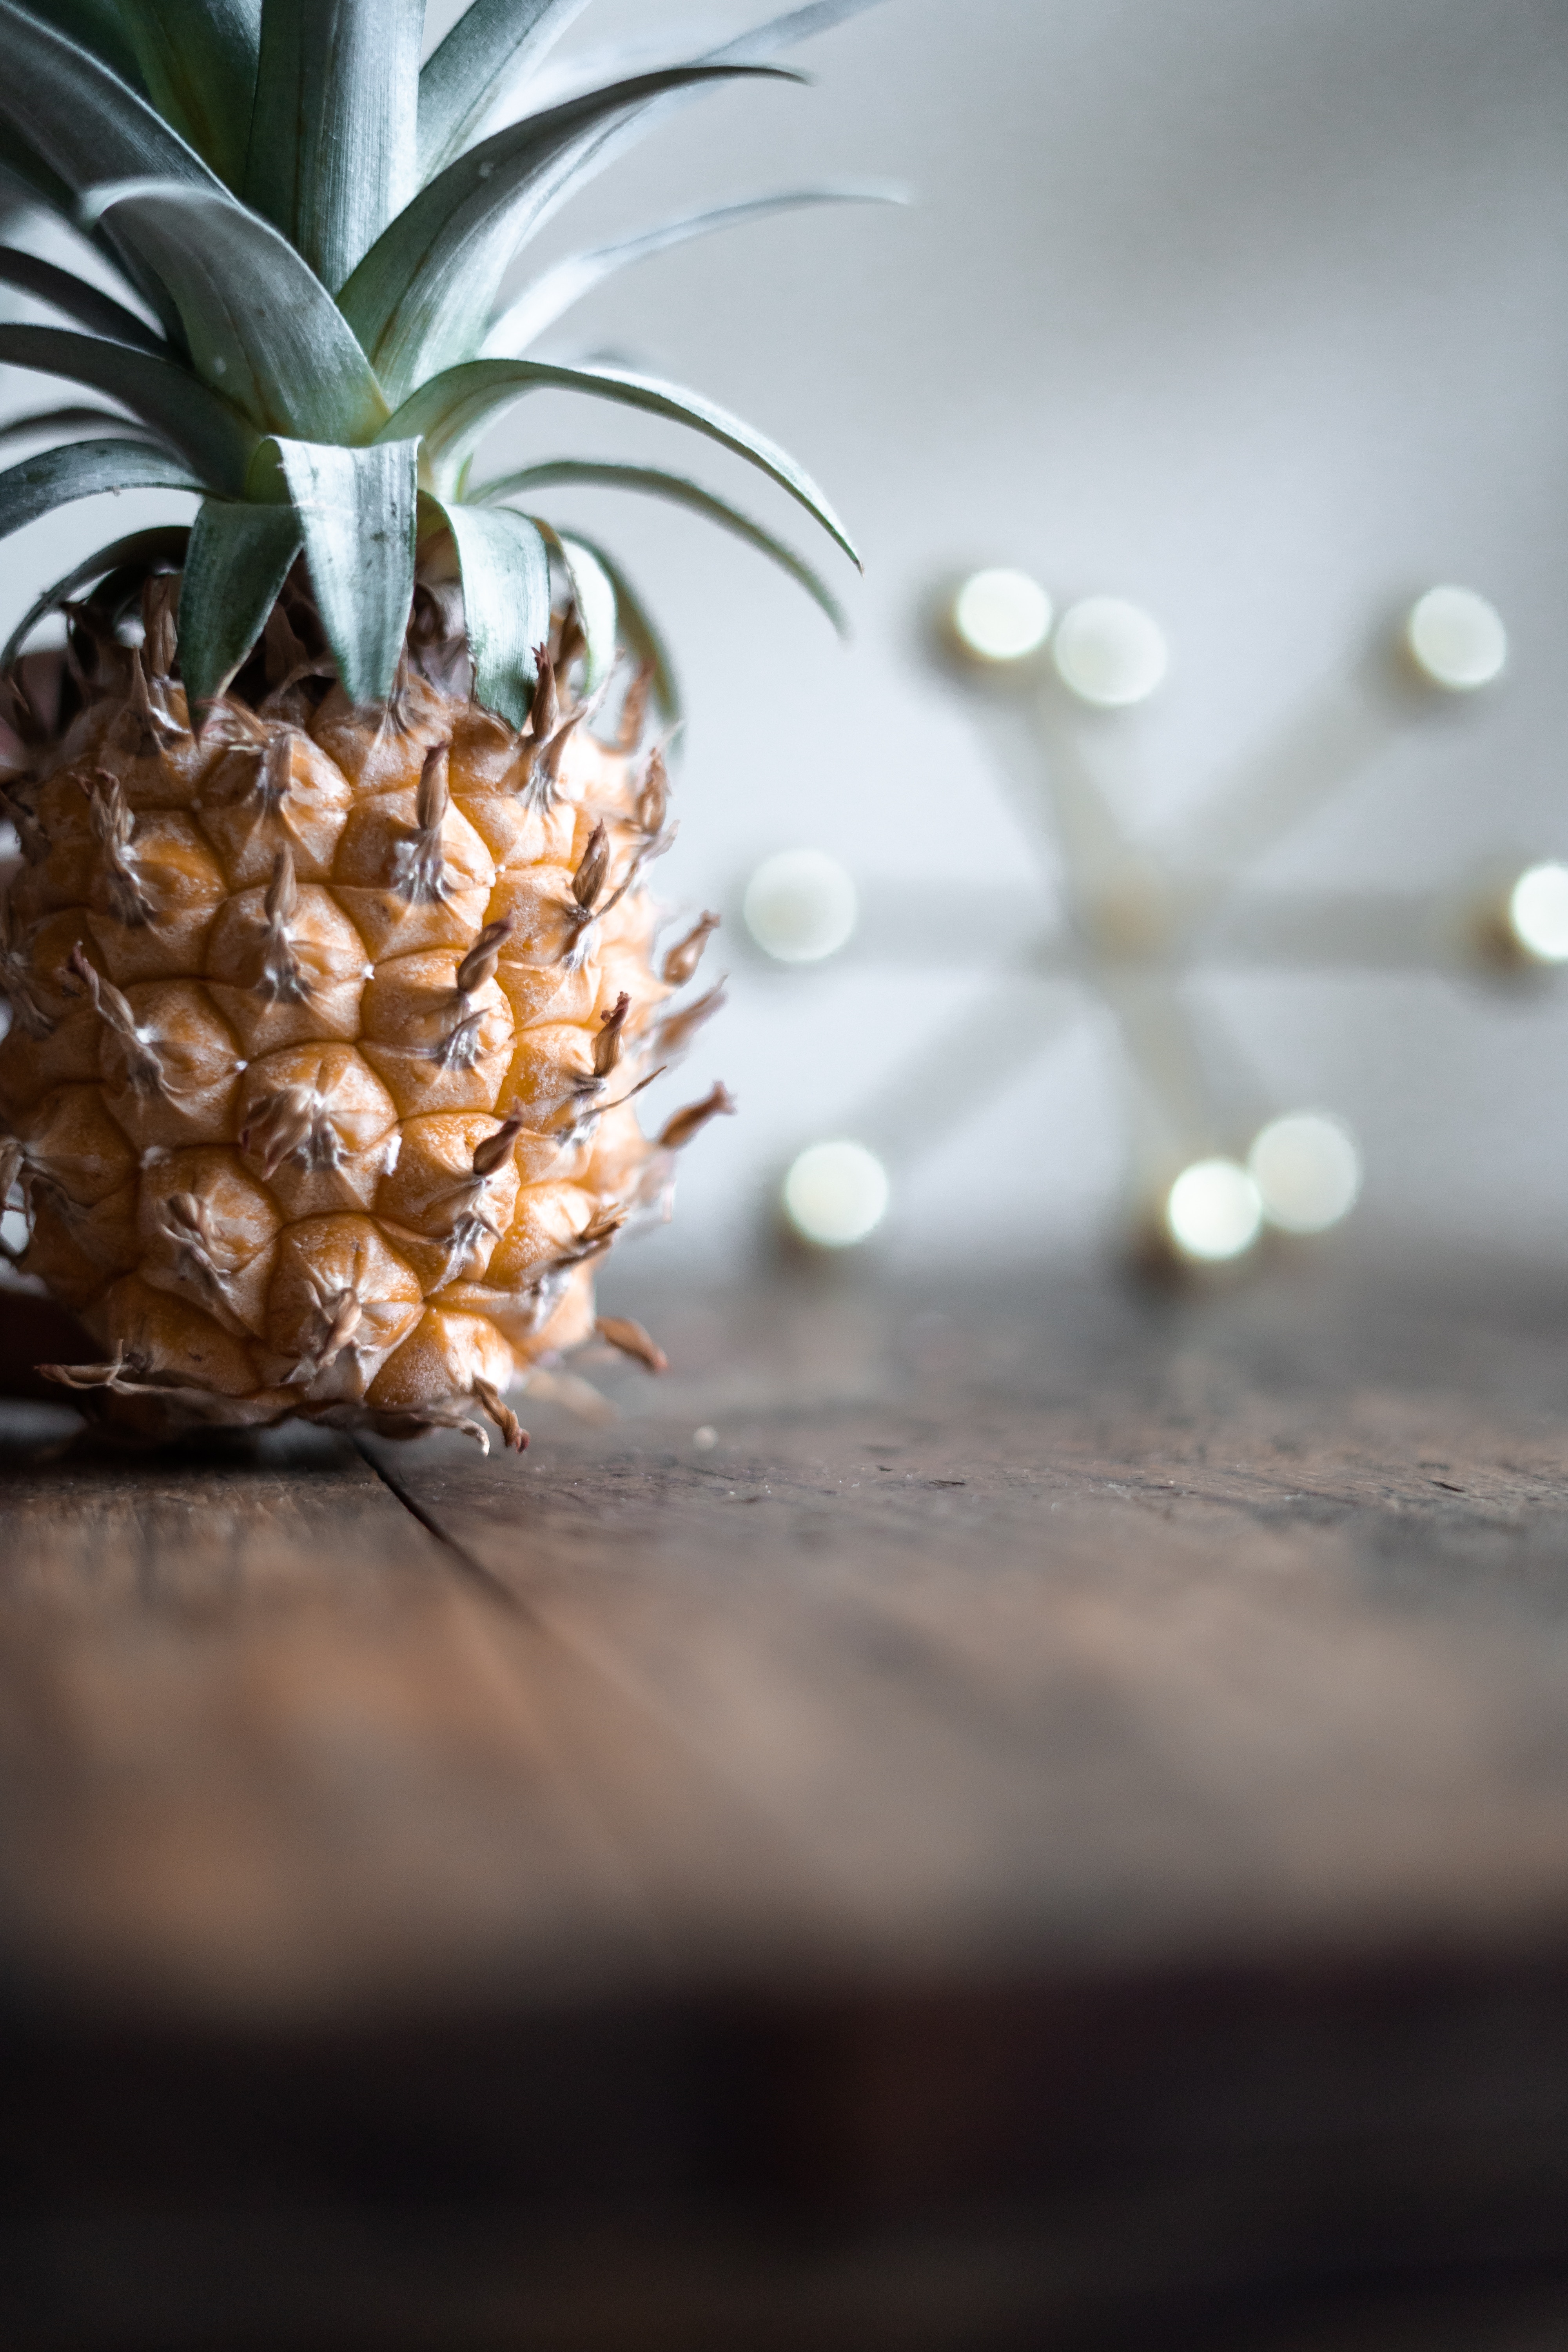 Pineapple on wooden table to the left with out of focus decorative piece to the right, all with a white background.